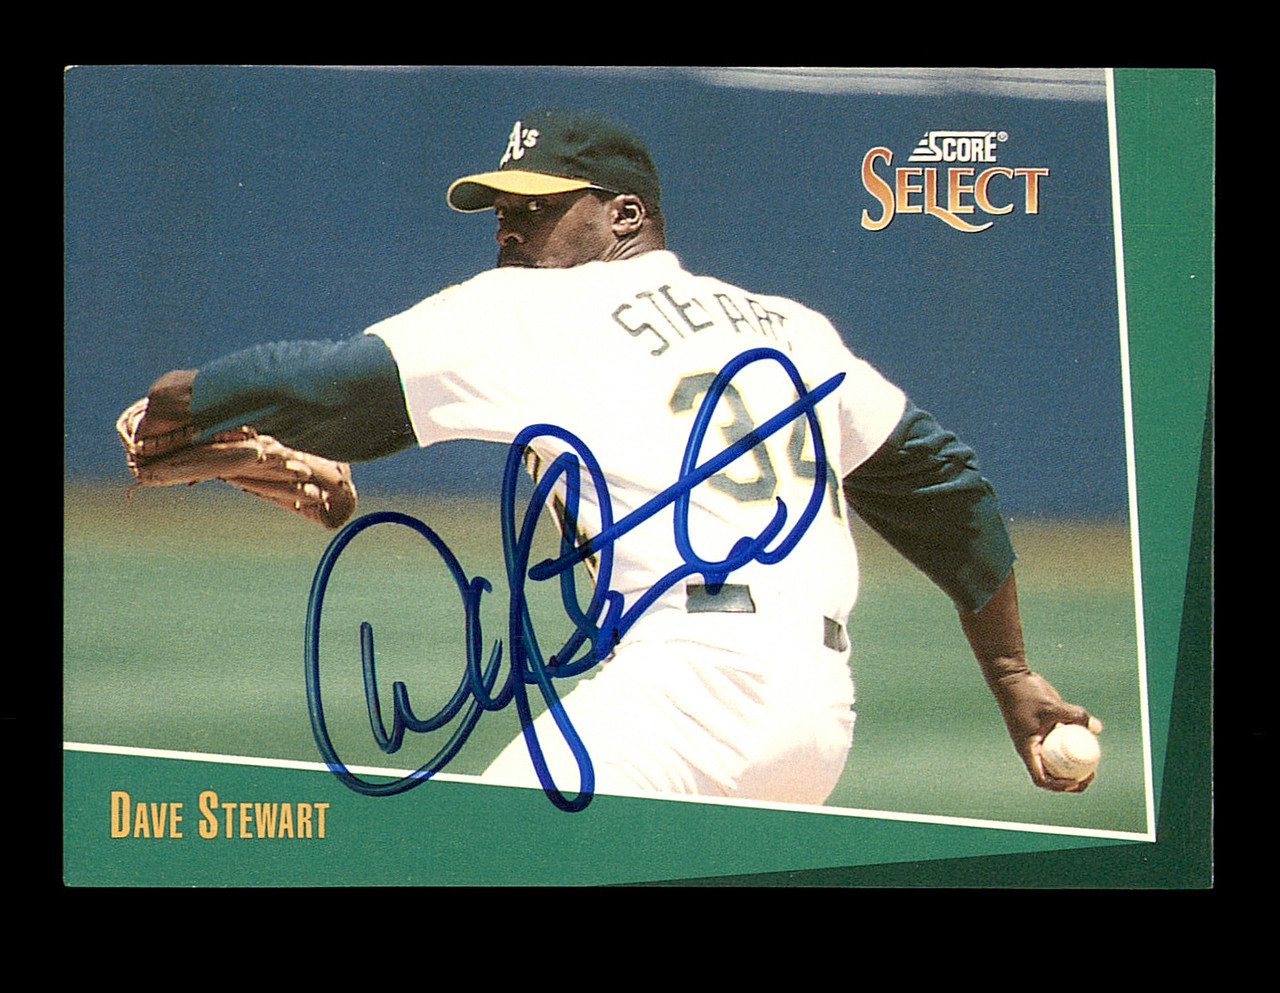 Dave Stewart Autographed 1993 Score Select Card #240 Oakland A's